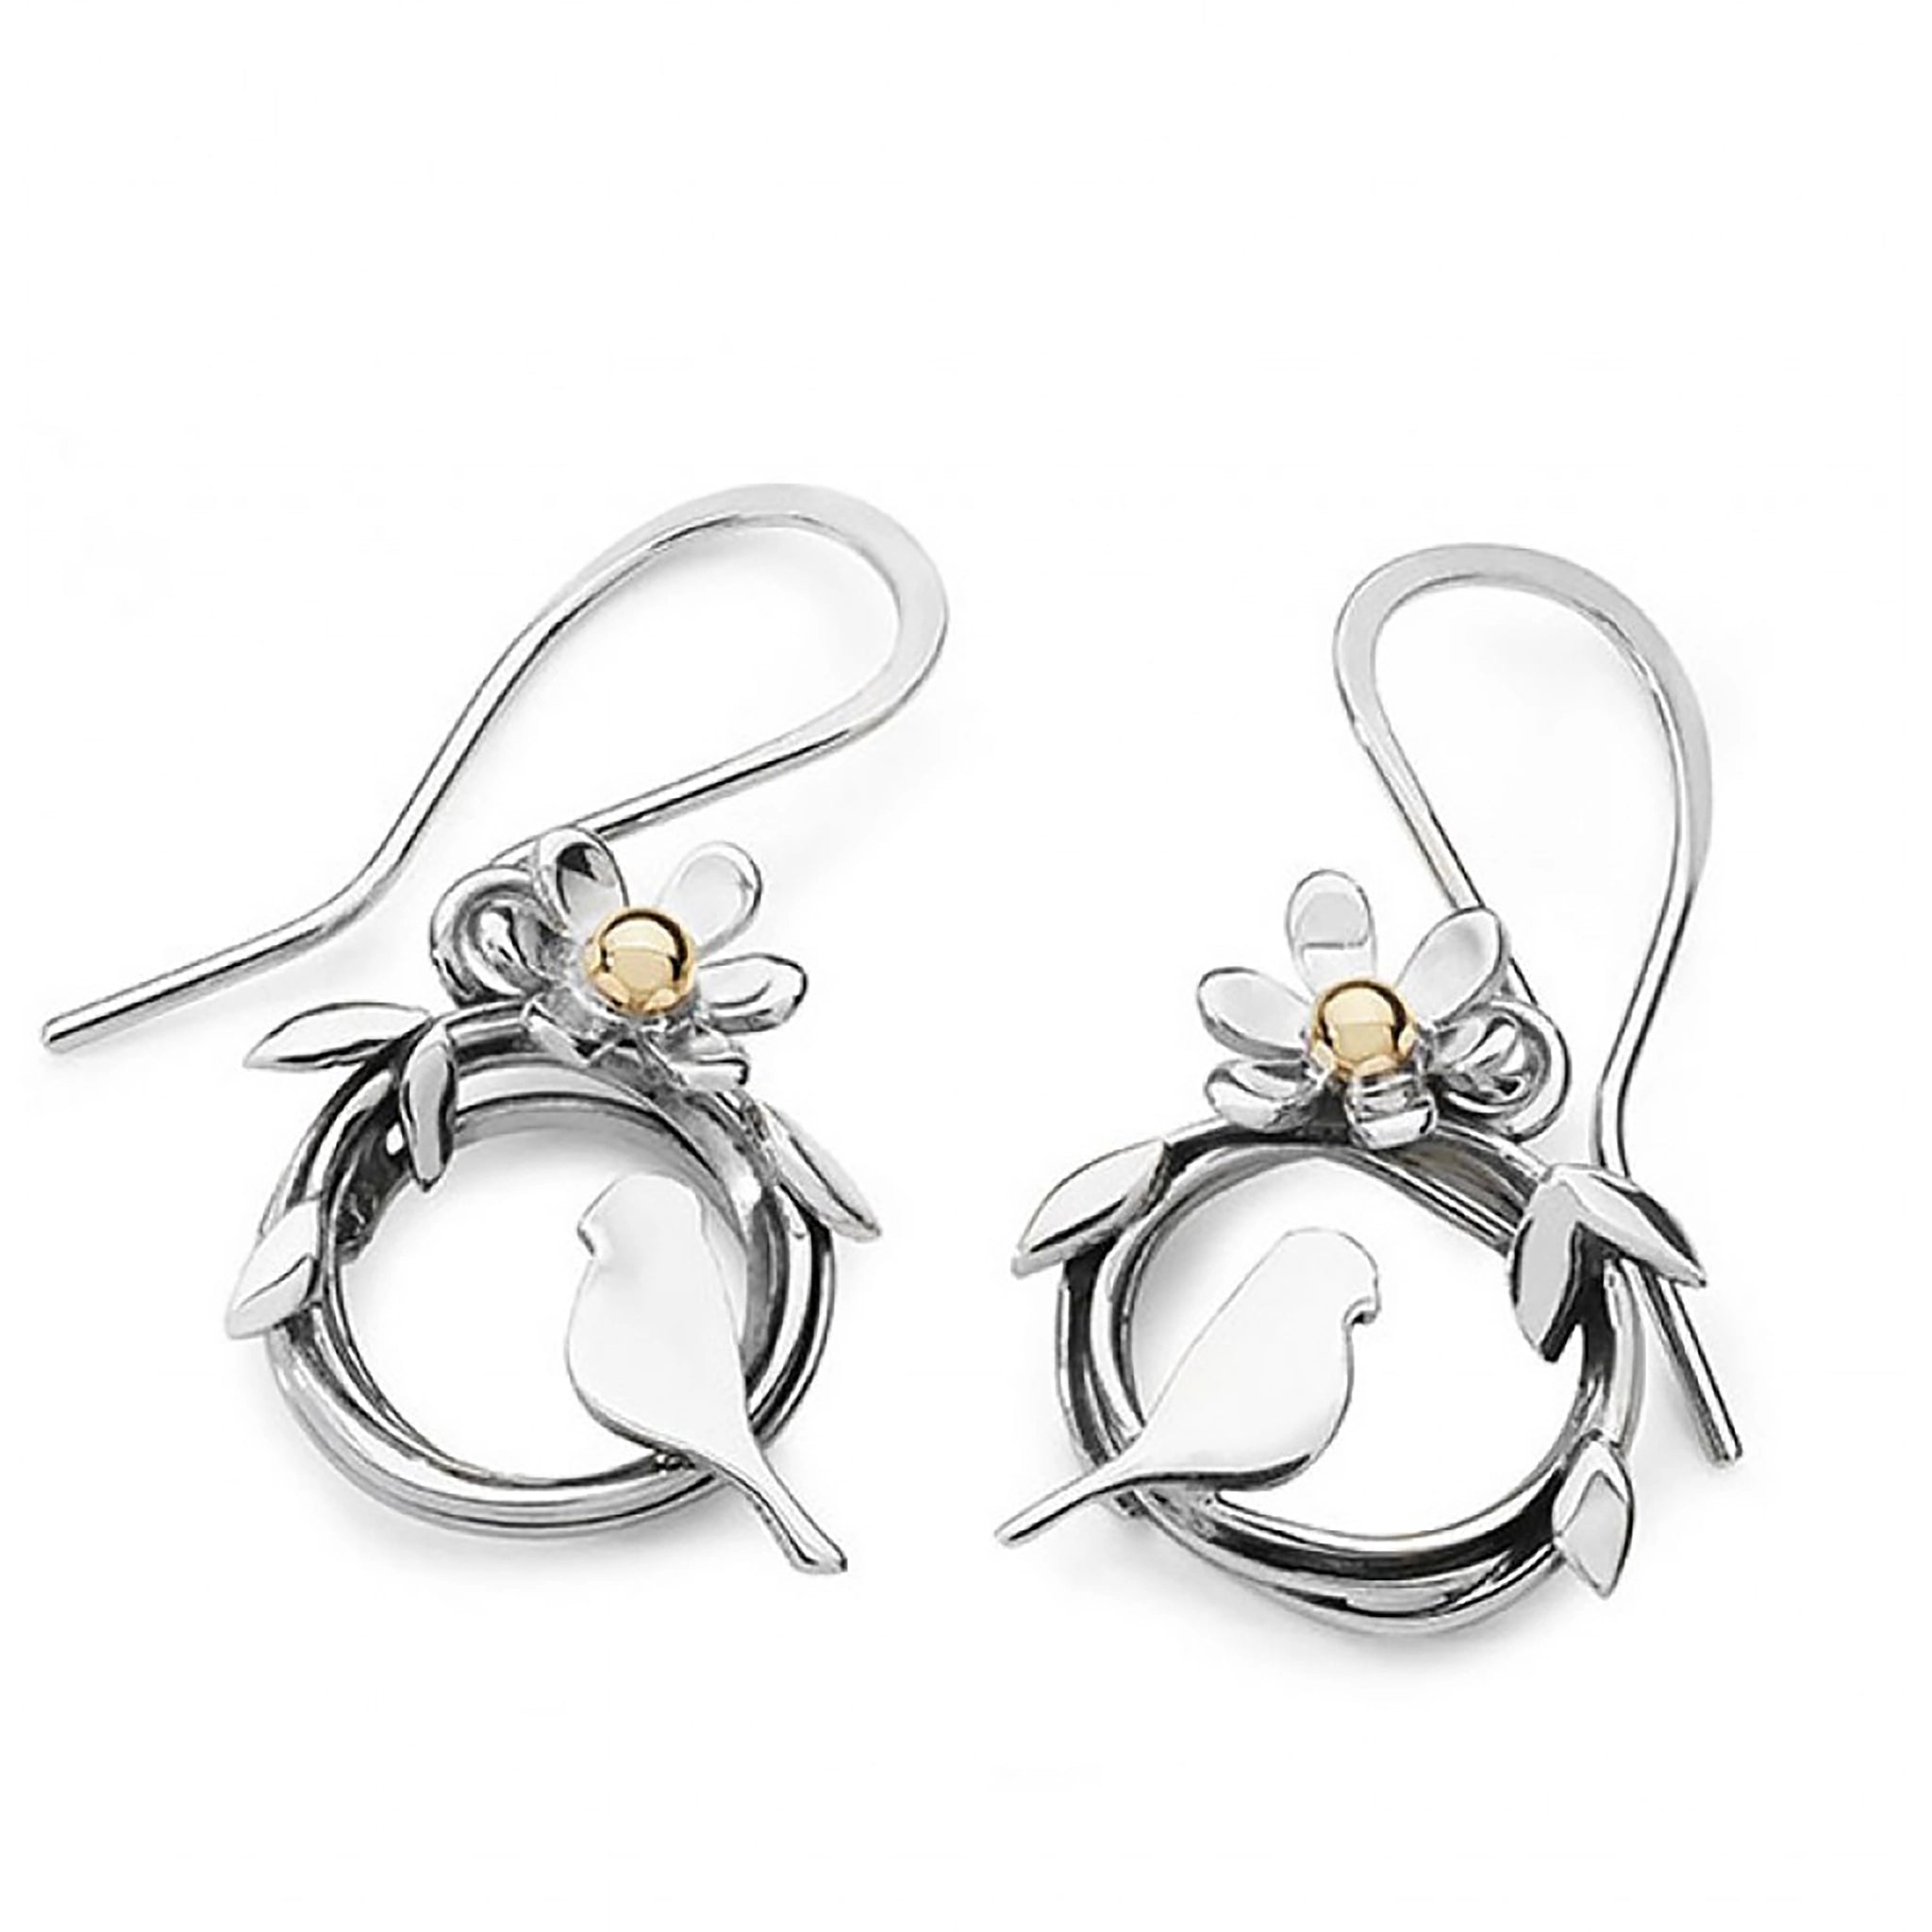 Pair of round silver bird nest earrings with bird & leaf design and a flower with a gold centre on hook fittings